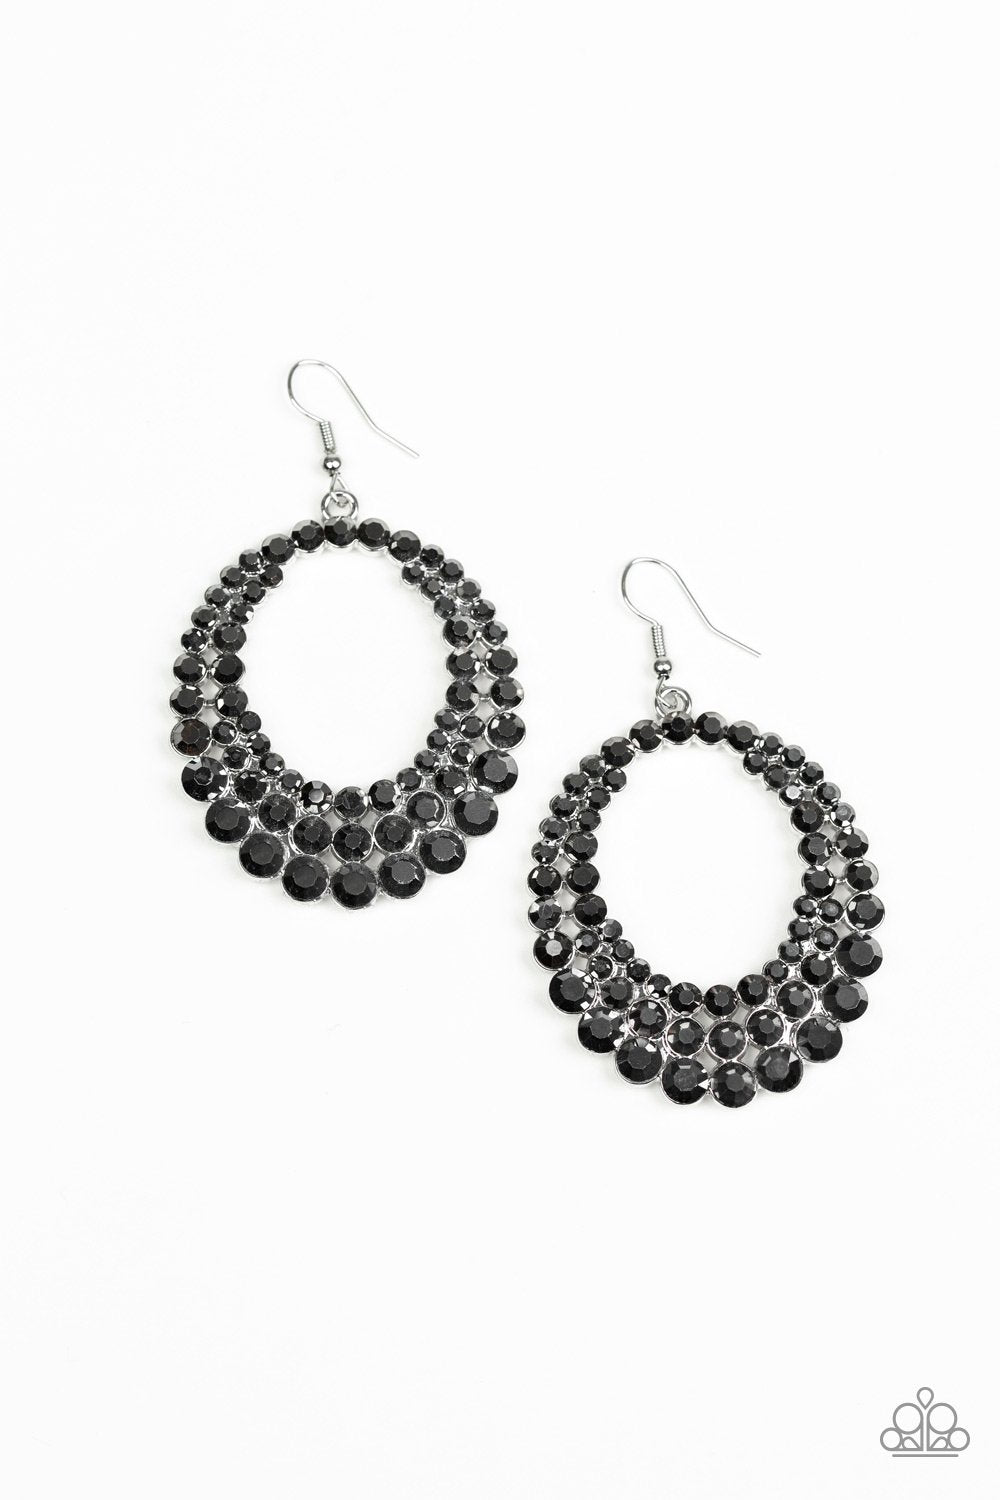 Universal Shimmer Silver Hematite Earrings - Paparazzi Accessories-CarasShop.com - $5 Jewelry by Cara Jewels